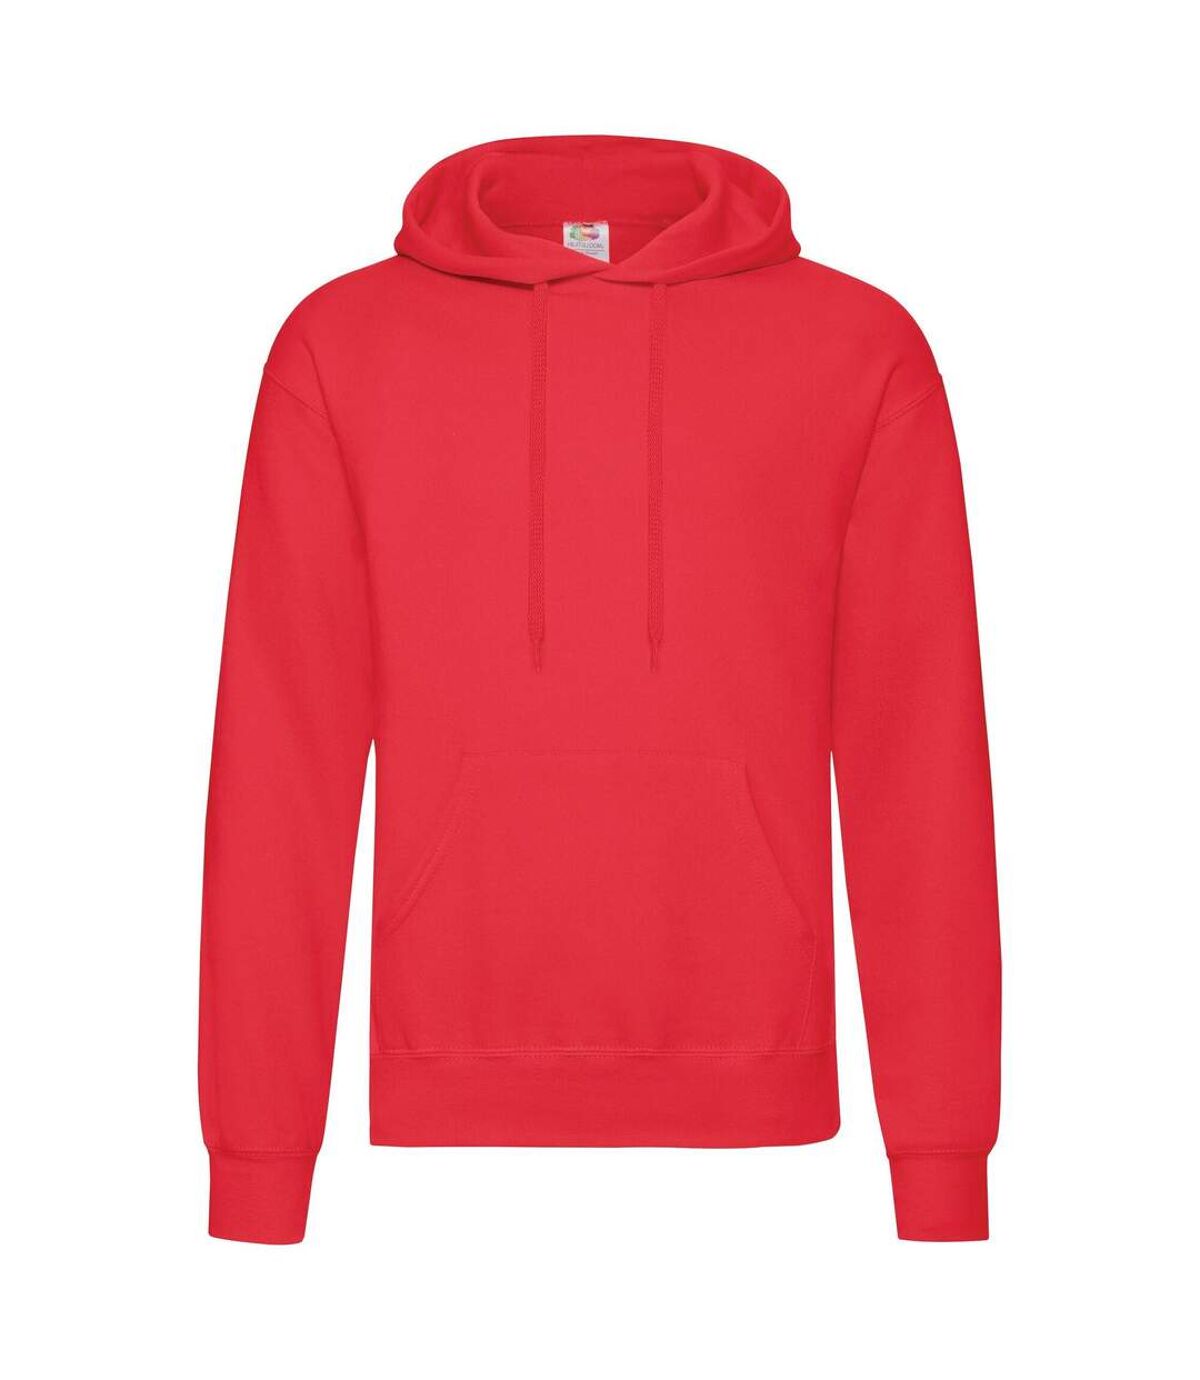 Fruit Of The Loom Unisex Adults Classic Hooded Sweatshirt (Red)